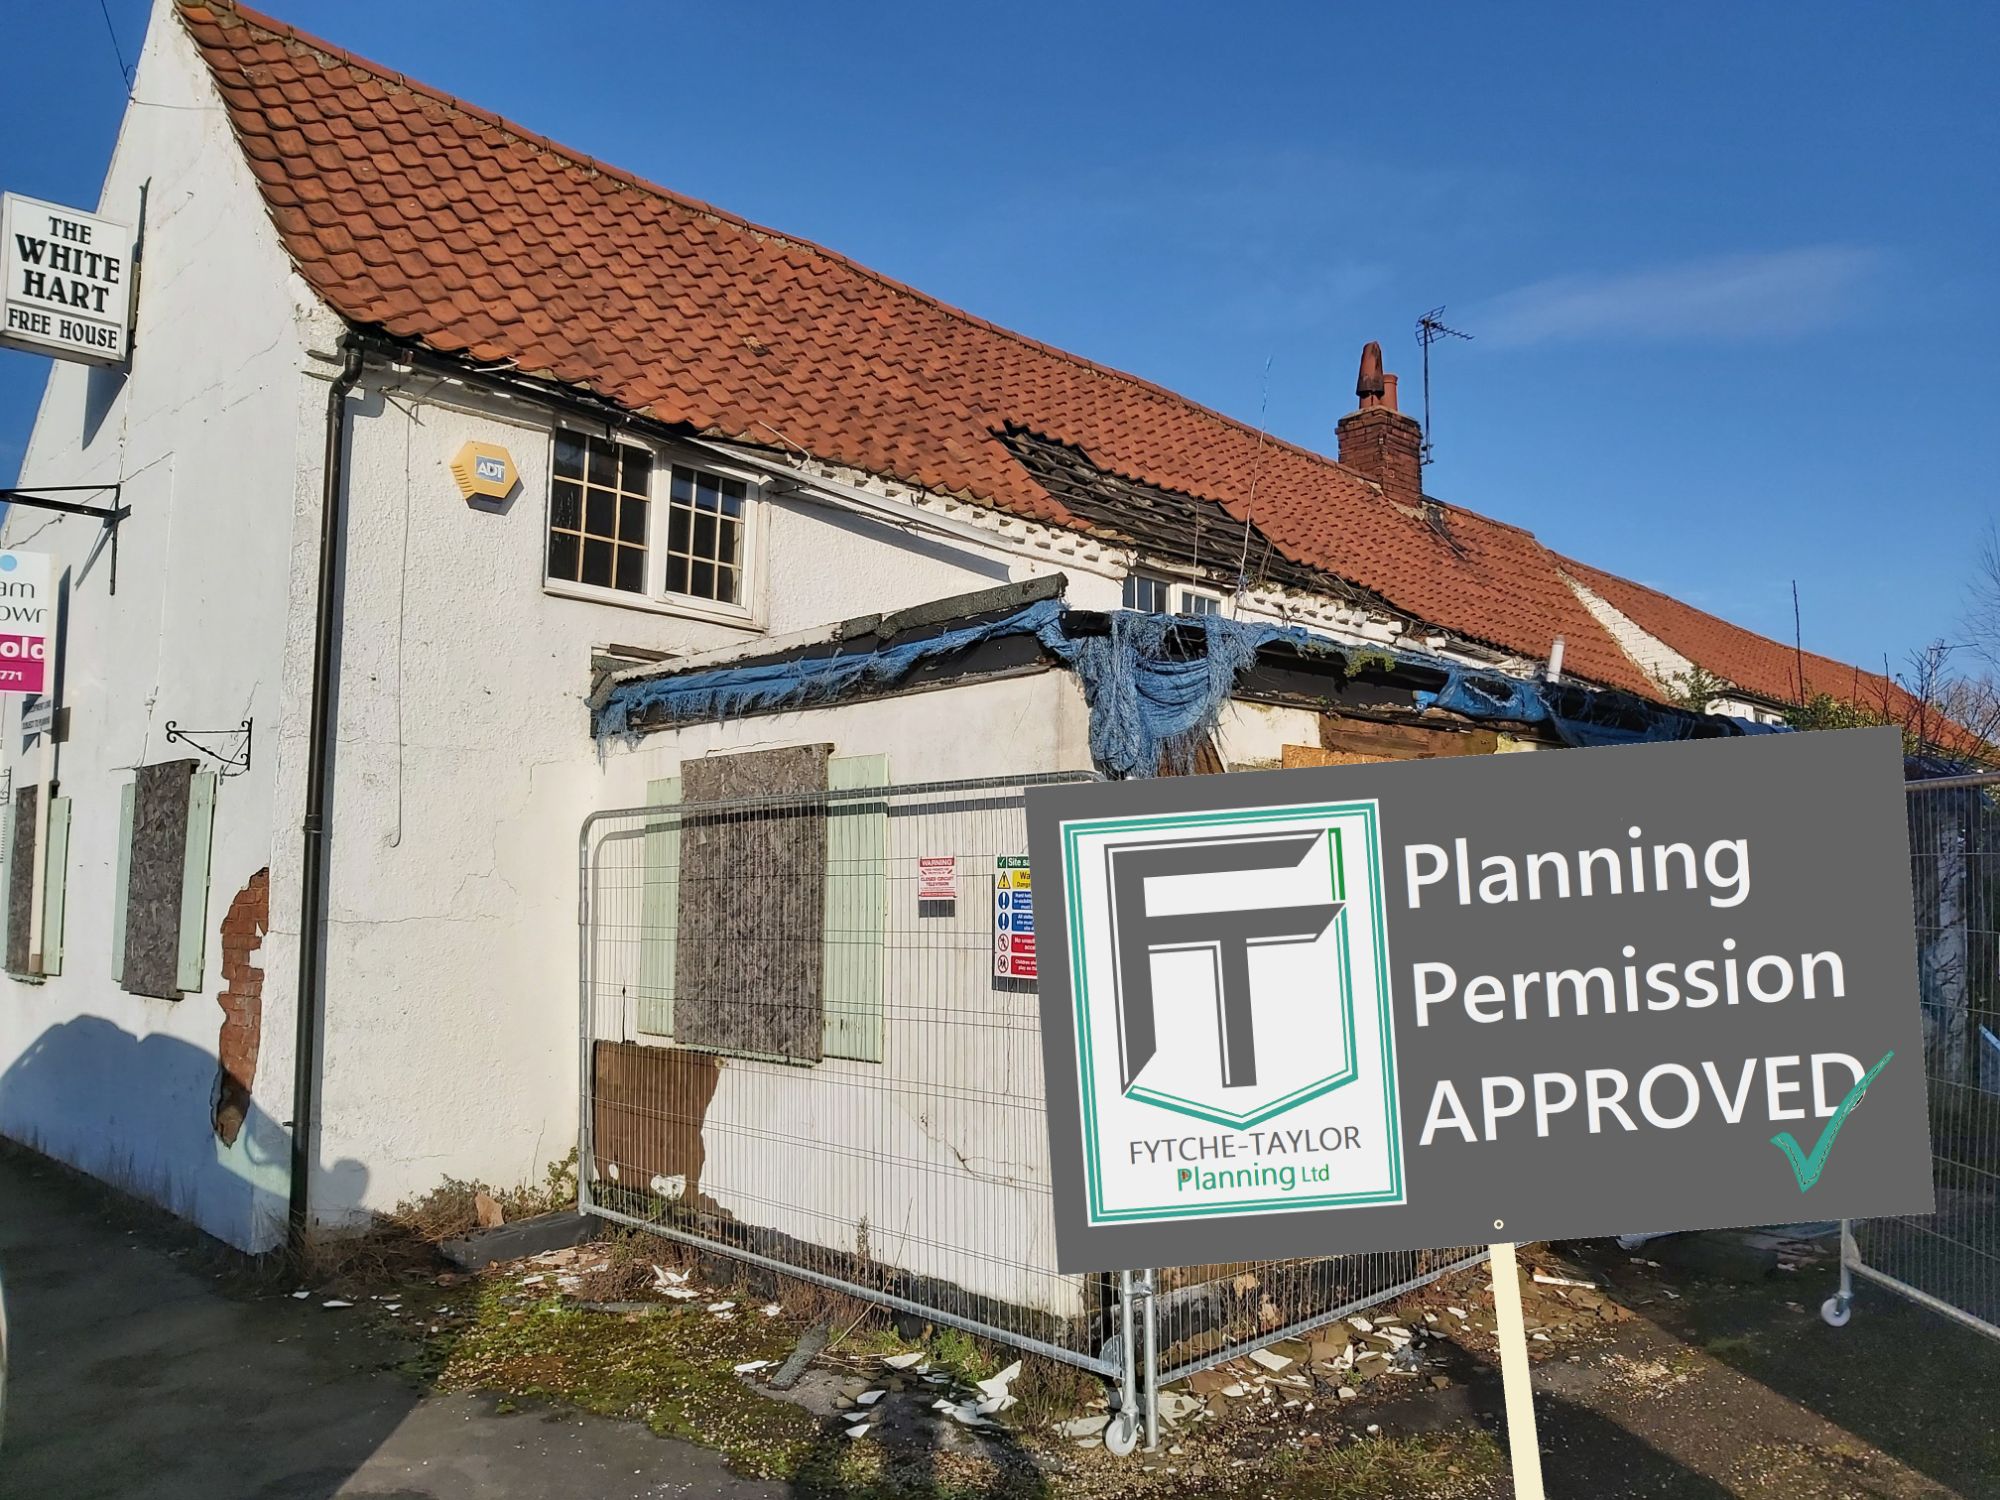 Former White Hart Hotel in Newton on Trent near Lincoln. Planning application approved and permission granted for conversion to 3 new homes.